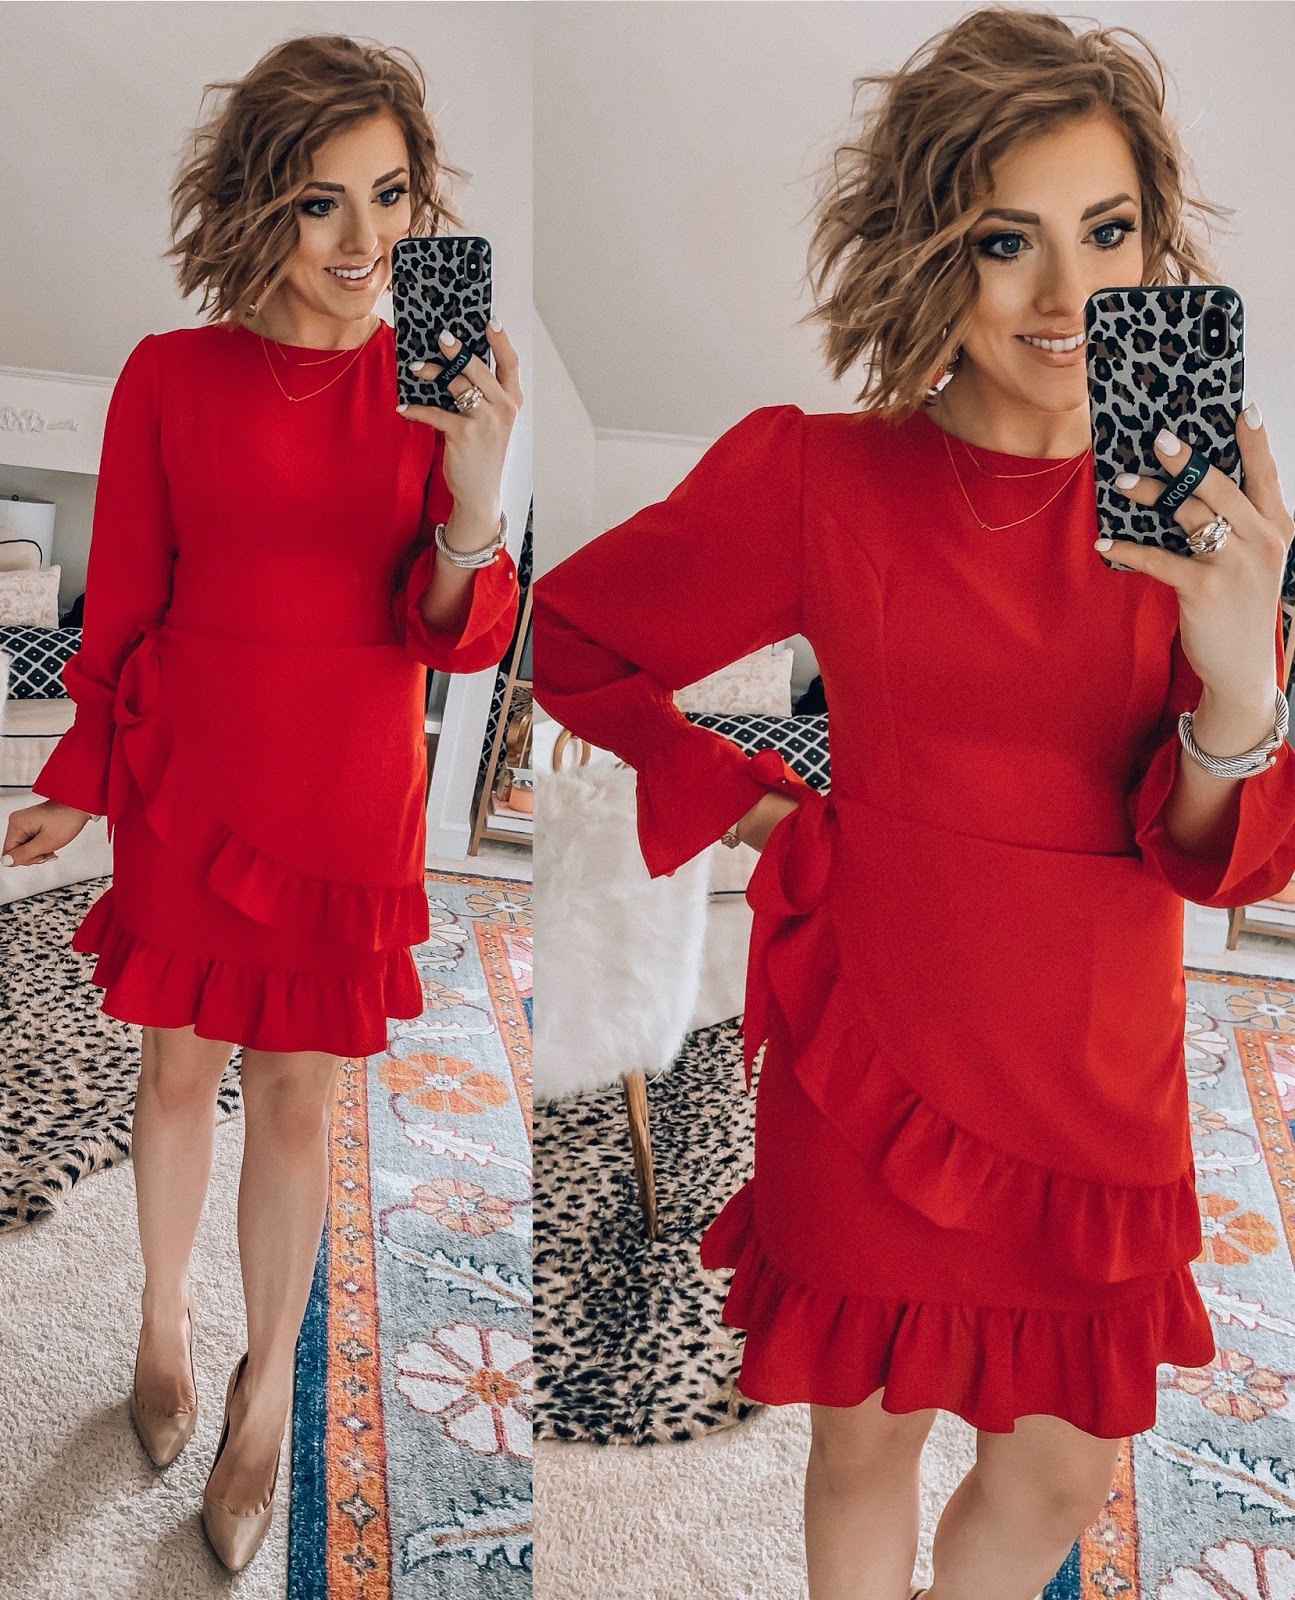 Recent Amazon Finds - Under $30 Little Red Dress perfect for Valentine's Day - Something Delightful Blog #AmazonFashion #RecentFinds #Hearts #ValentinesDay #AffordableFashion